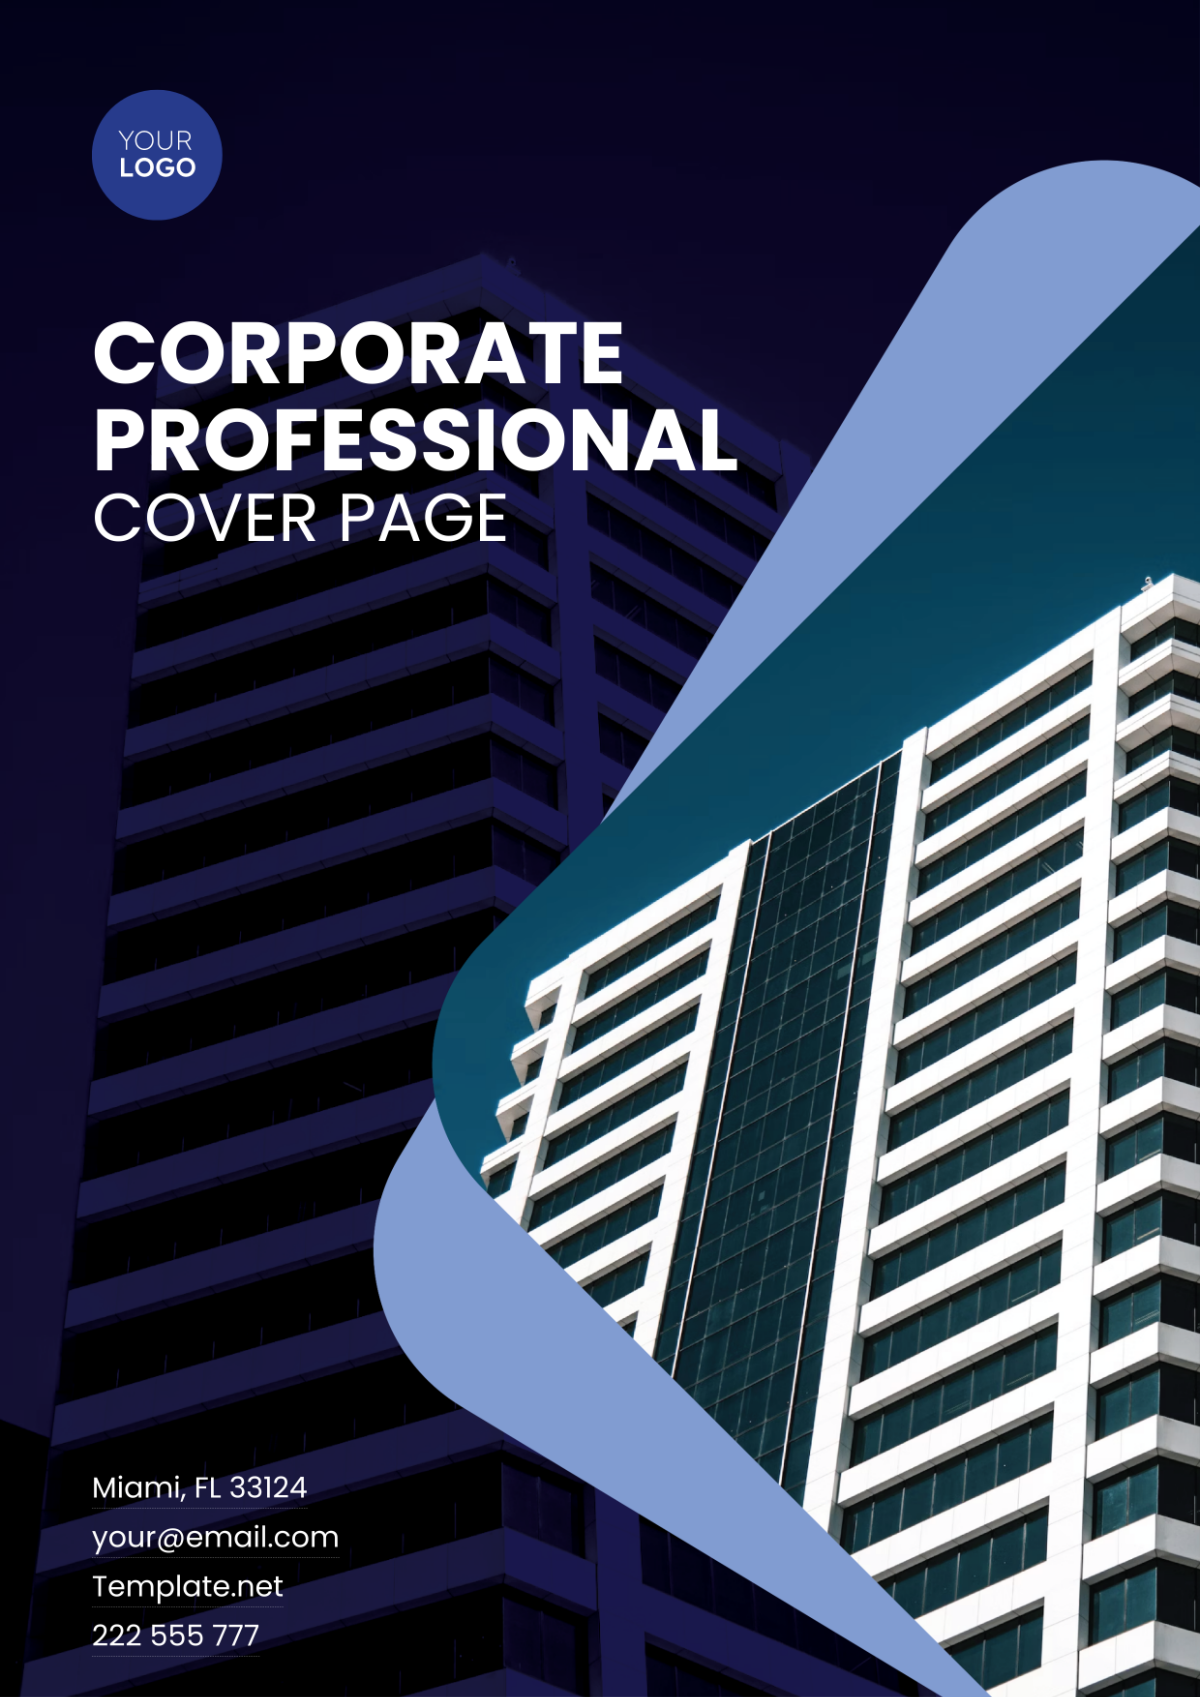 Corporate Professional Cover Page